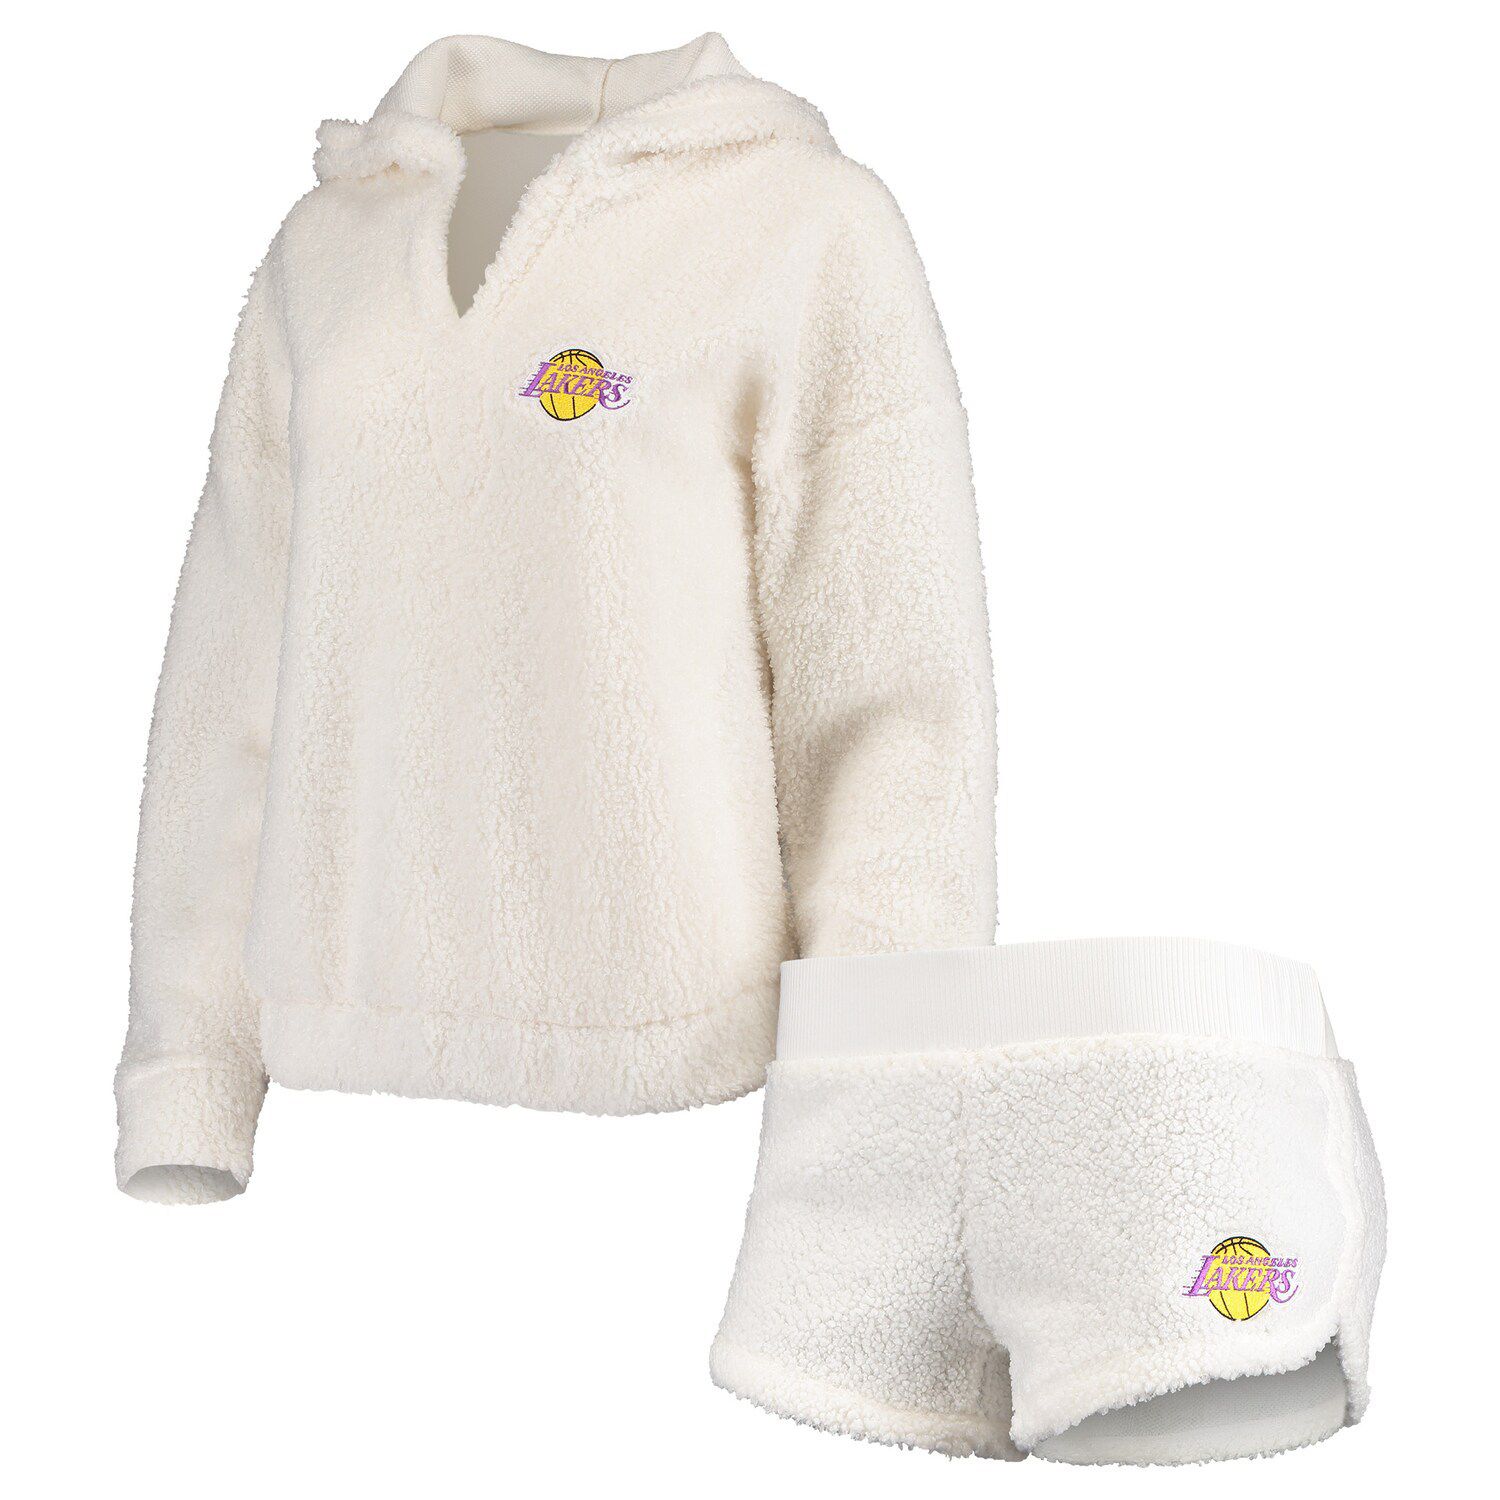 Image for Unbranded Women's Concepts Sport Cream Los Angeles Lakers Fluffy Long Sleeve Hoodie Top & Shorts Sleep Set at Kohl's.